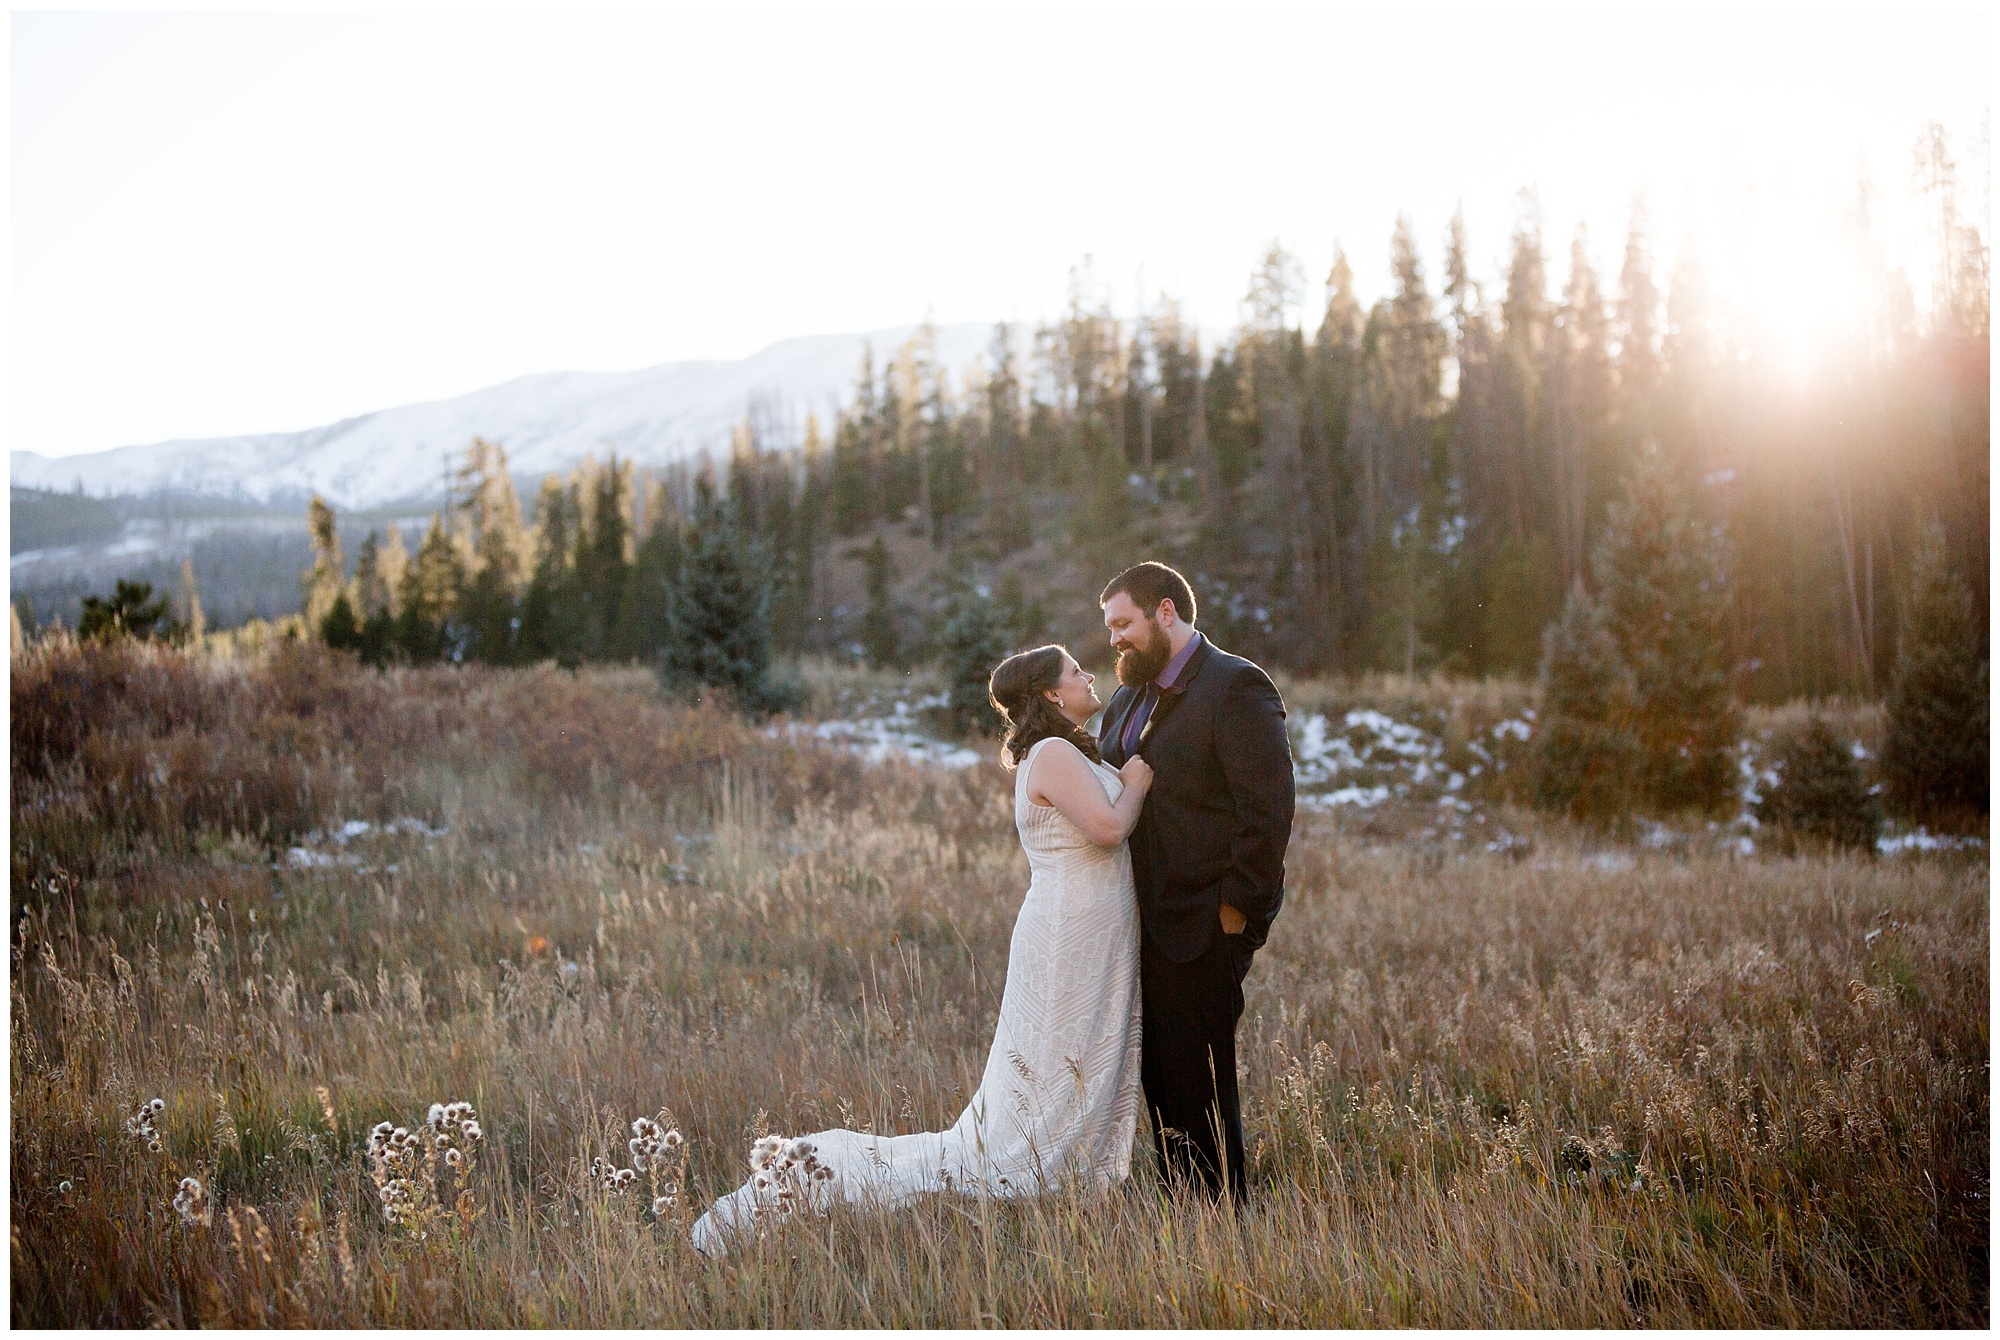 At their Colorado mountain elopement portraits, the bride and groom embrace.